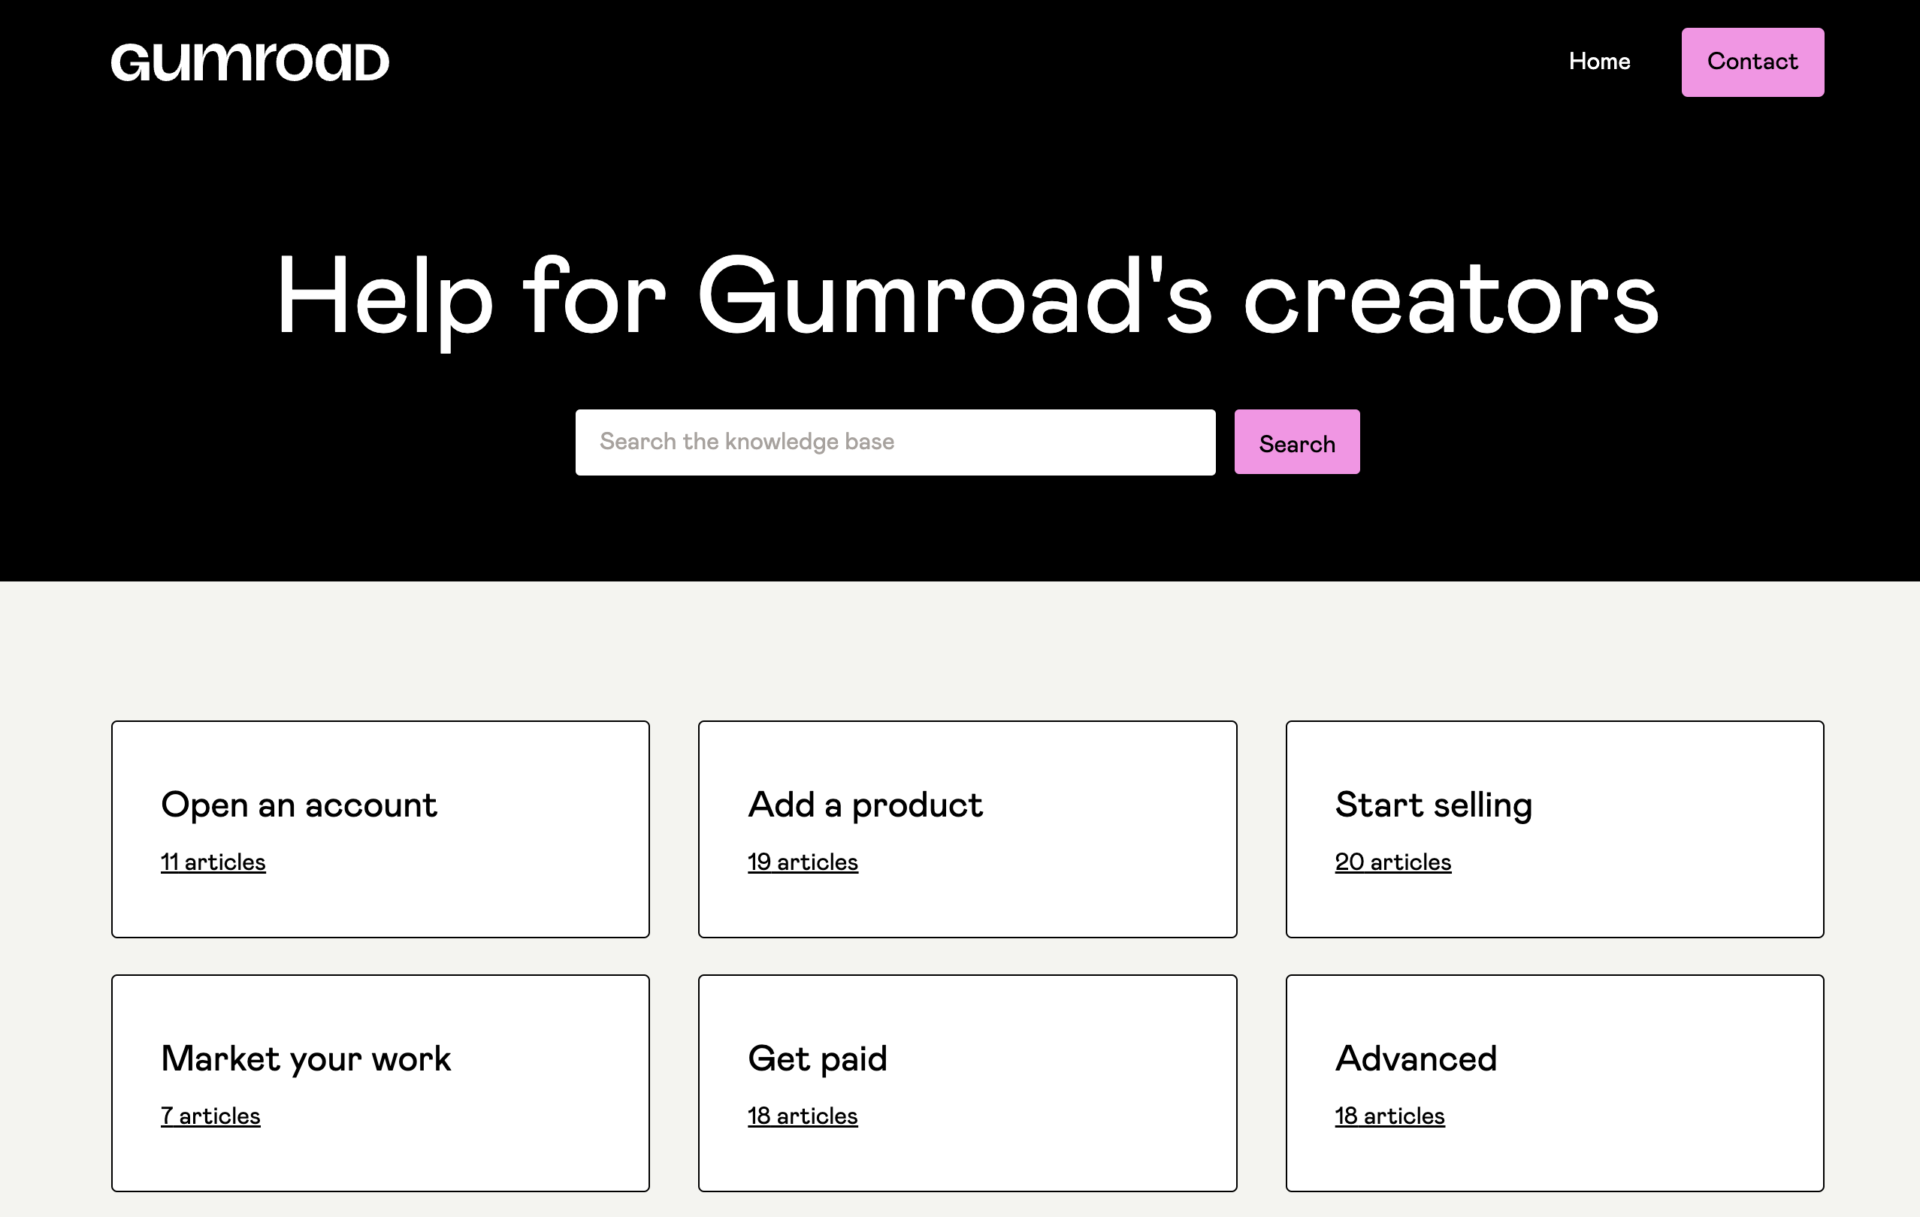 Top page of Gumroad help center